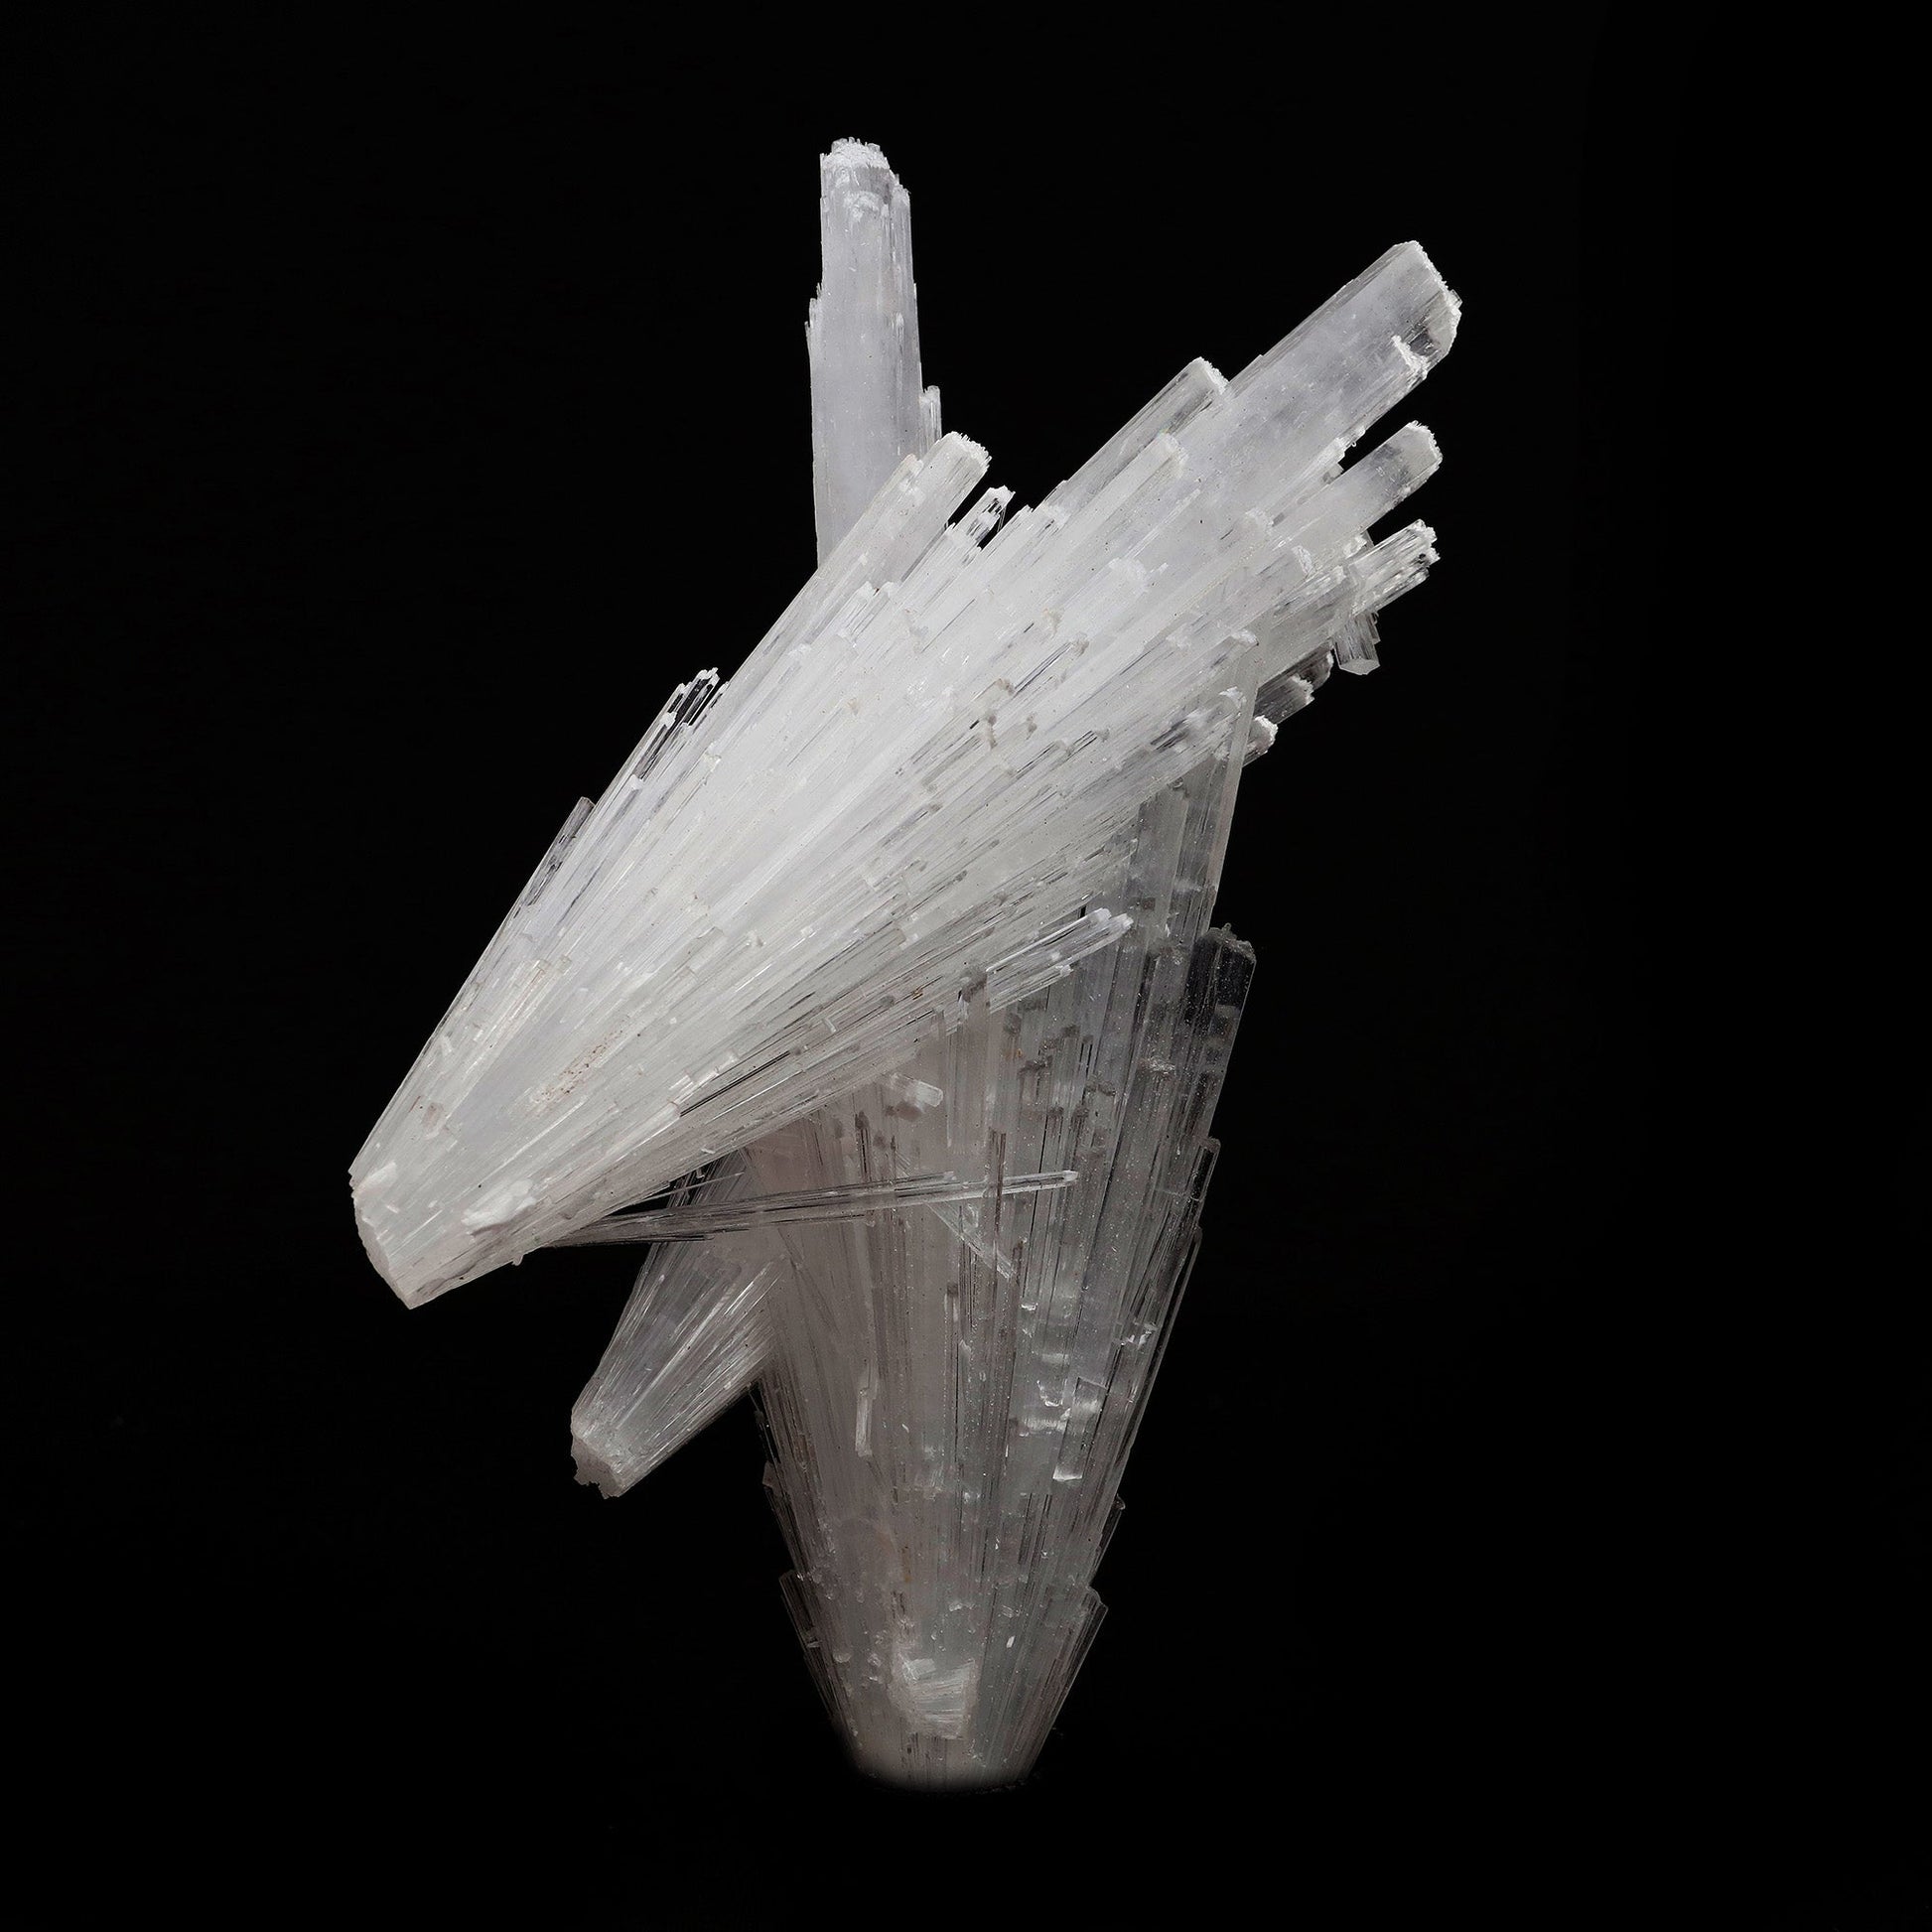 Scolecite Spray Cross Formation Natural Mineral Specimen # B 5202  https://www.superbminerals.us/products/scolecite-spray-cross-formation-natural-mineral-specimen-b-5202  Features: Scolecite forms in clusters of sharp, prismatic, “needle-like” points, which often radiate outward from a source, or, alternatively, criss-cross with each other to form sculptures that are truly a natural art form. Scolecite is mainly found in India, although there are also deposits of white scolecite